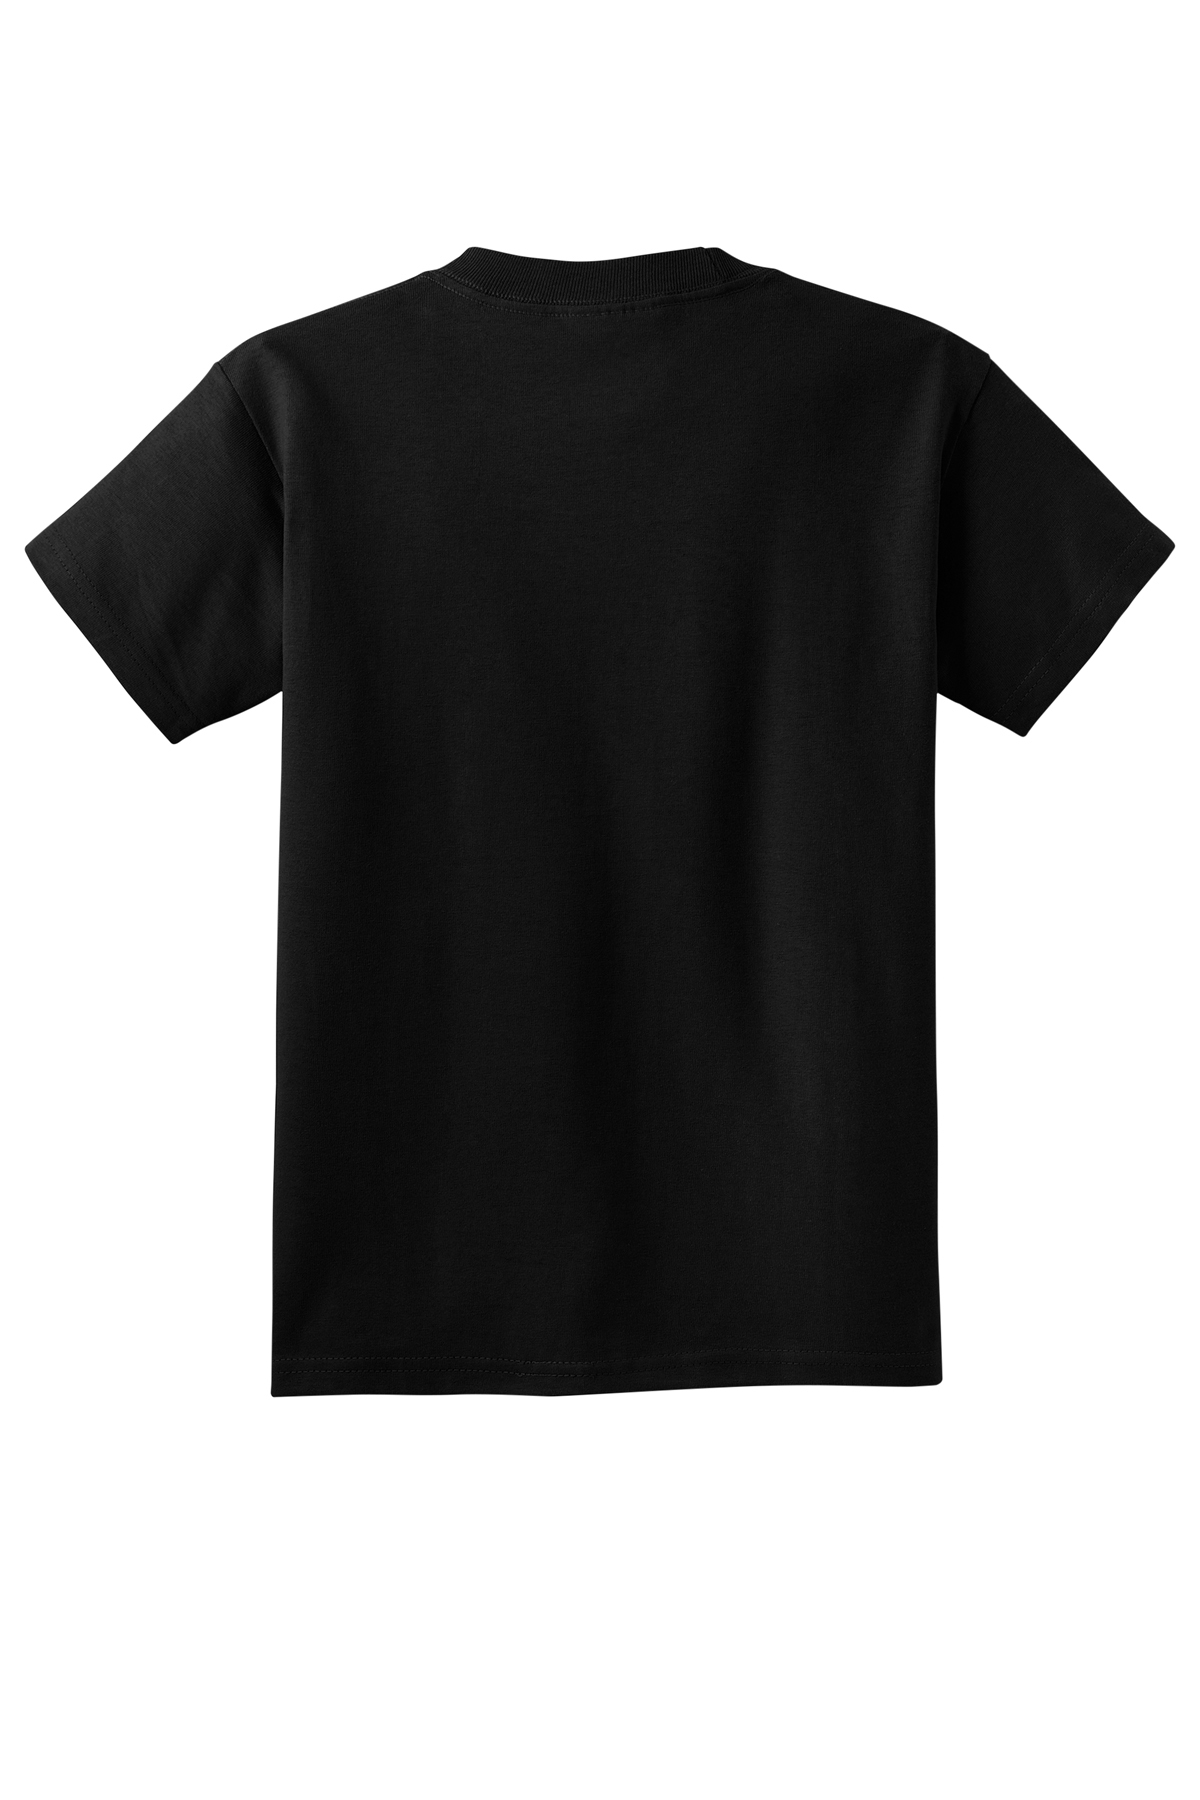 Port & Company Youth Core Cotton DTG Tee | Product | SanMar